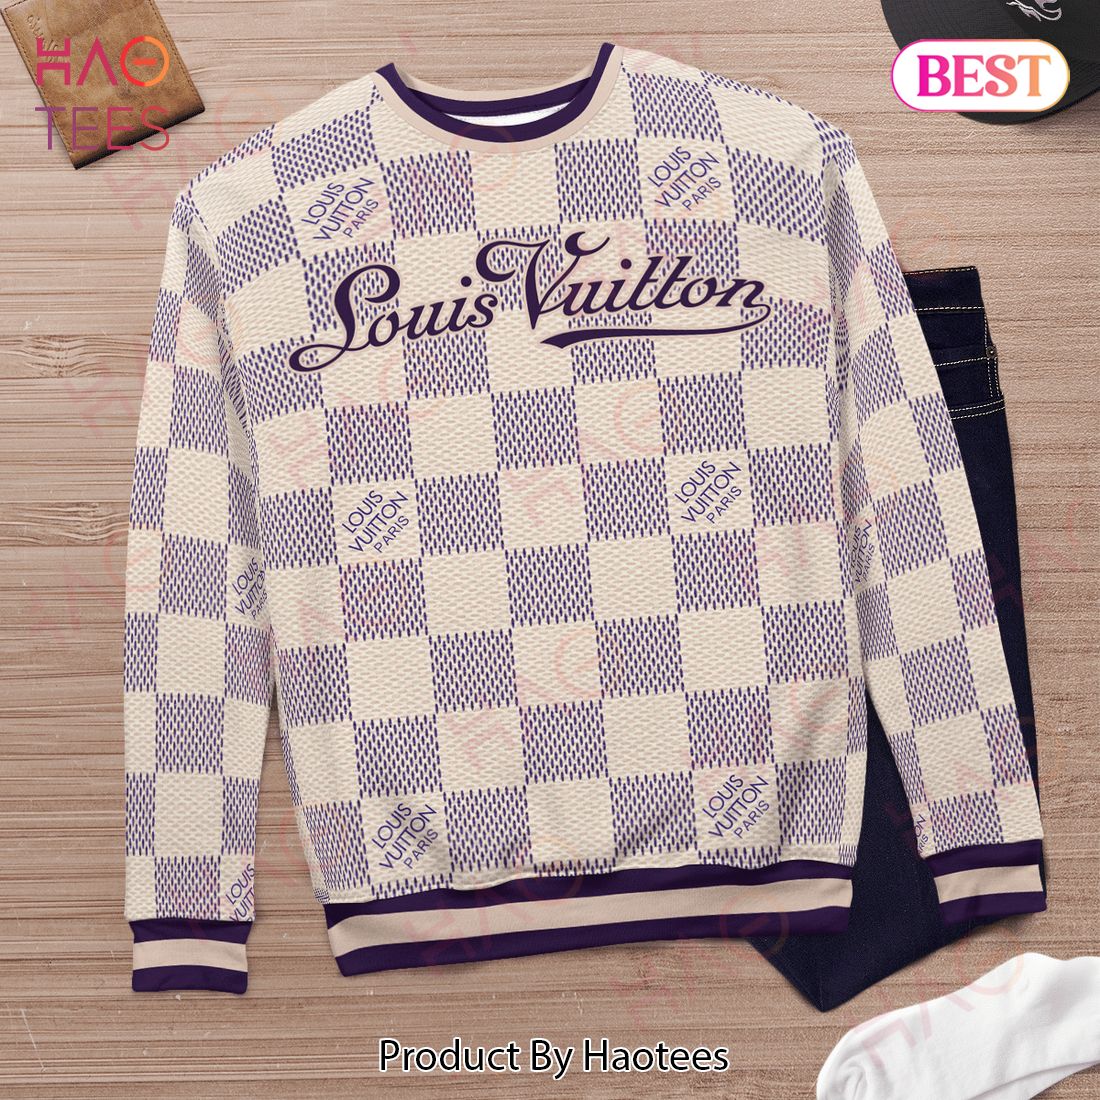 Louis Vuitton Purple And Beige Checkerboard Ugly Christmas Sweater